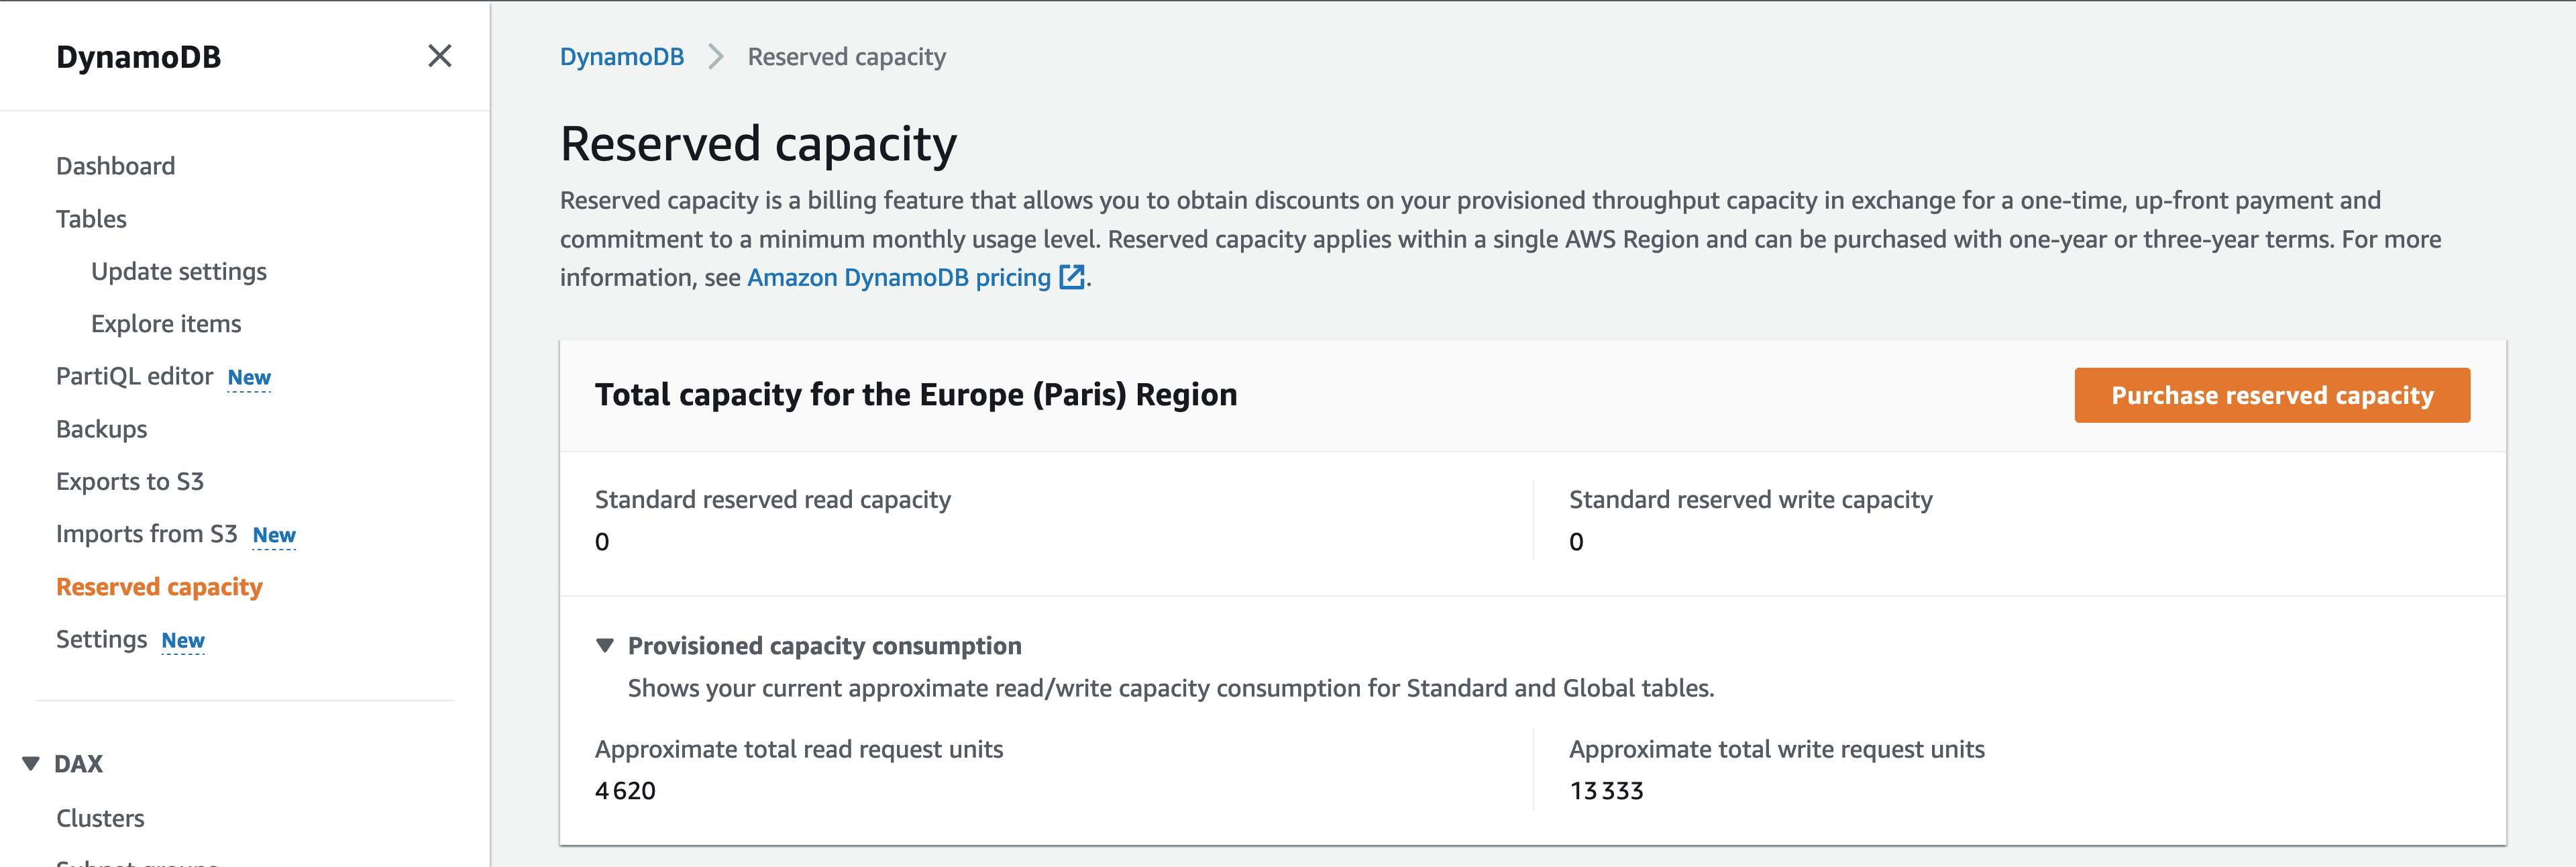 DynamoDB Capacity used, right now, in one account and region